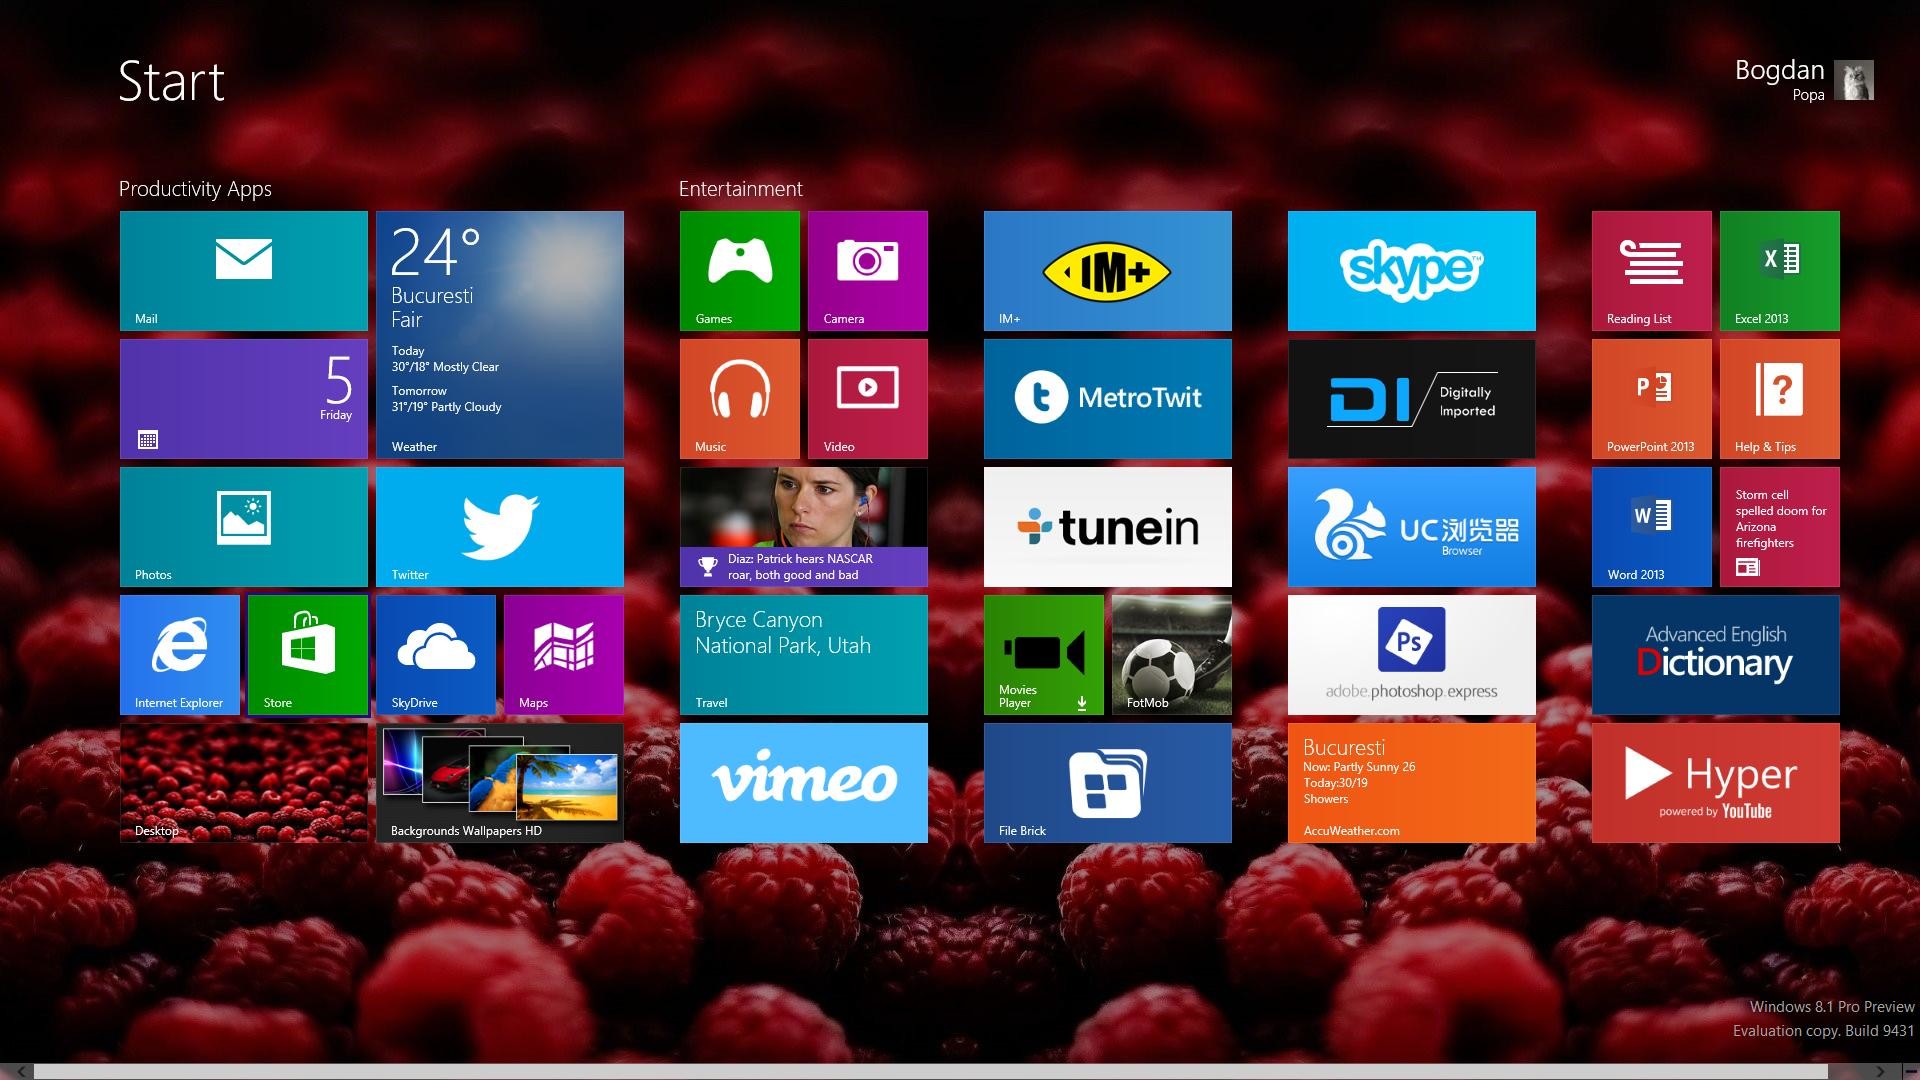 1920x1080 Start screen wallpapering dimming is turned on by default in Windows 8 .